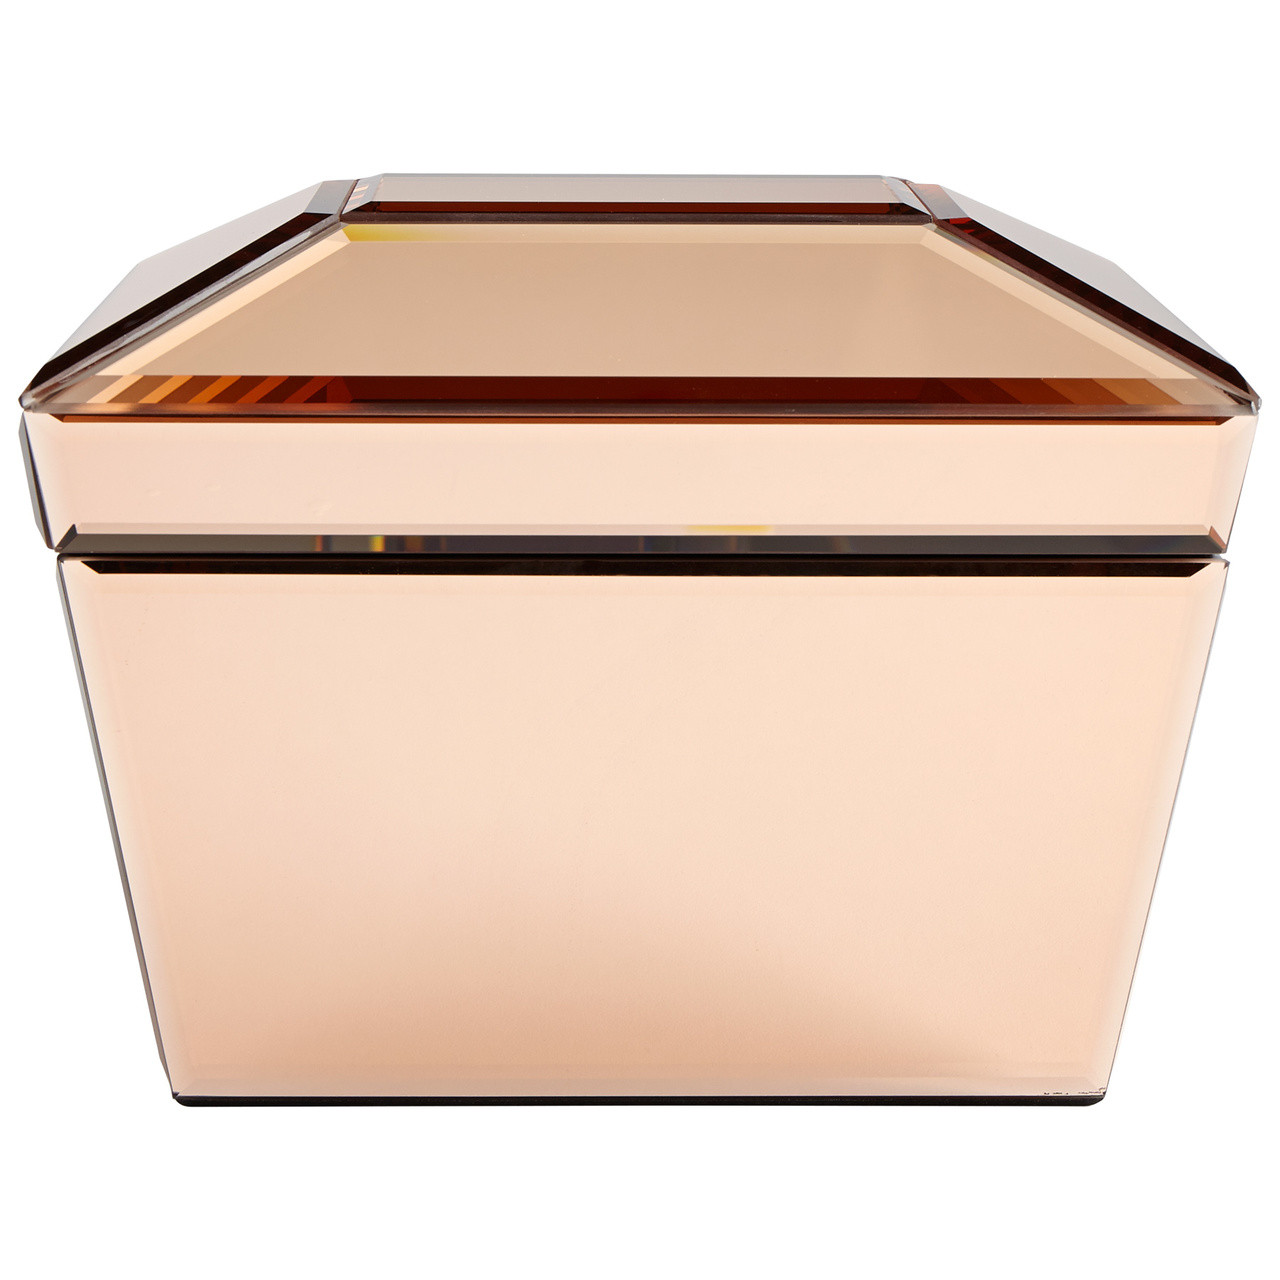 CYAN DESIGN 07901 Ace Container, Copper